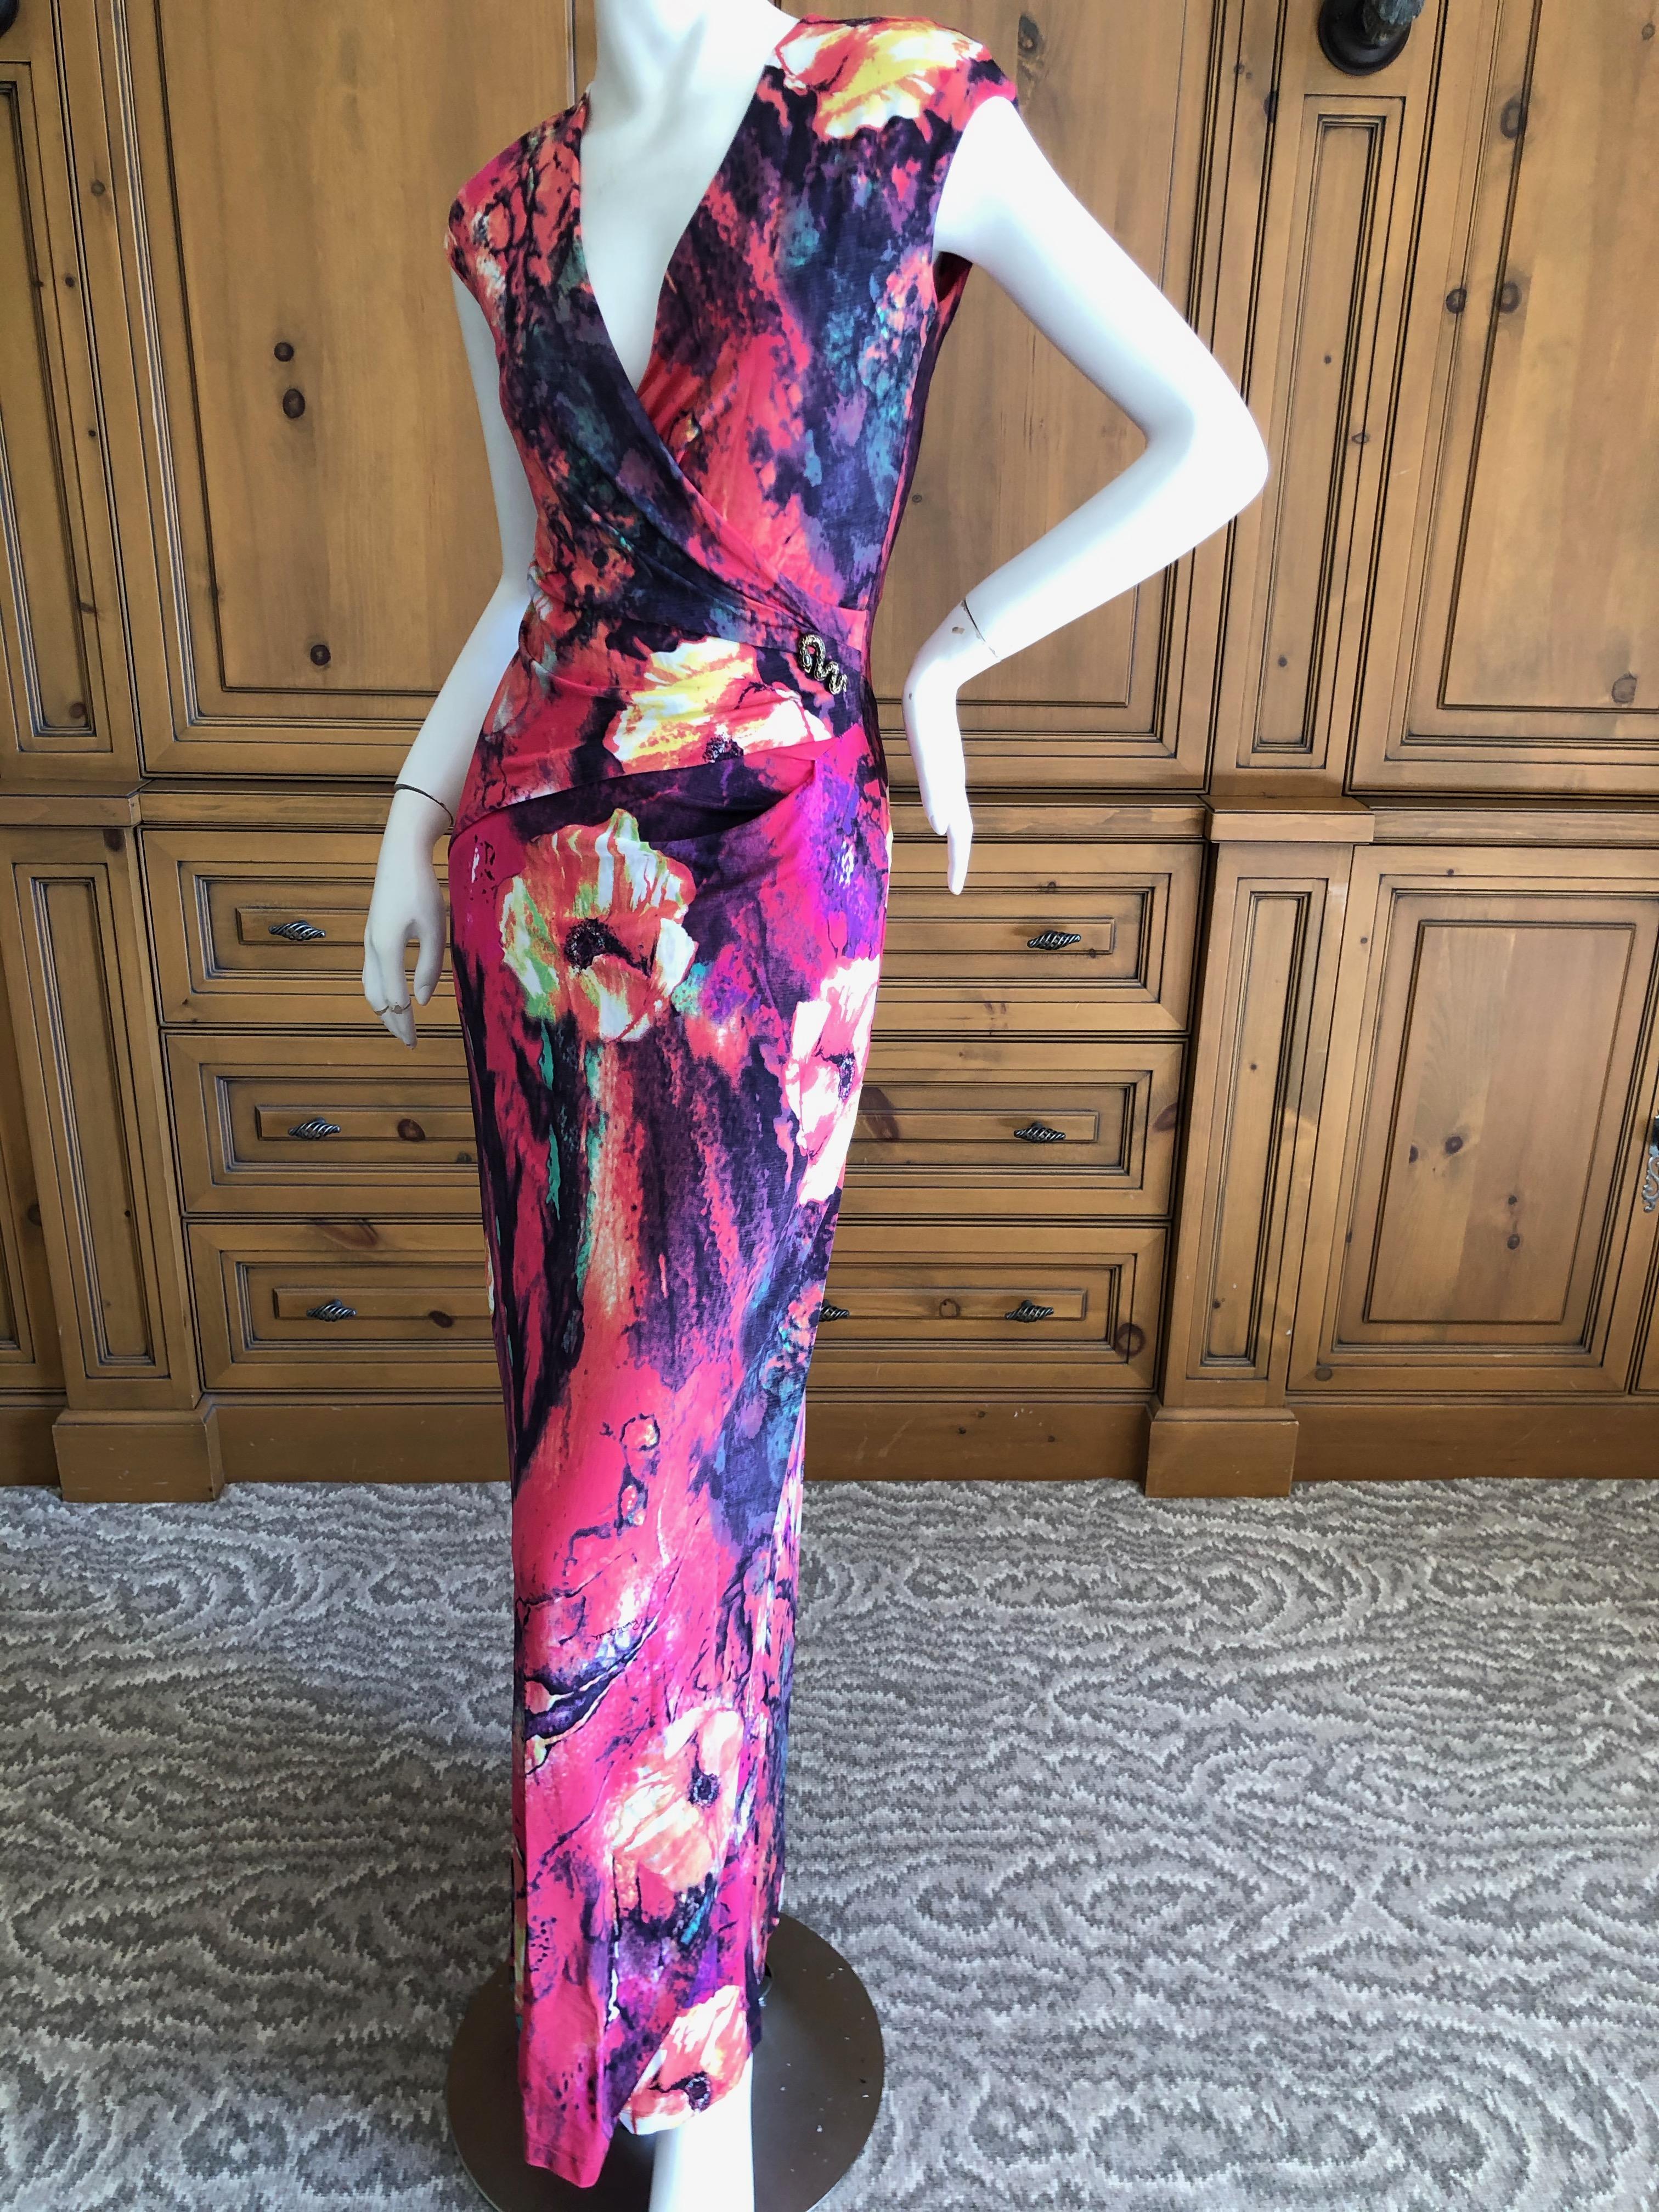 Roberto Cavalli Low Cut Floral VIntage Evening Dress In Excellent Condition For Sale In Cloverdale, CA